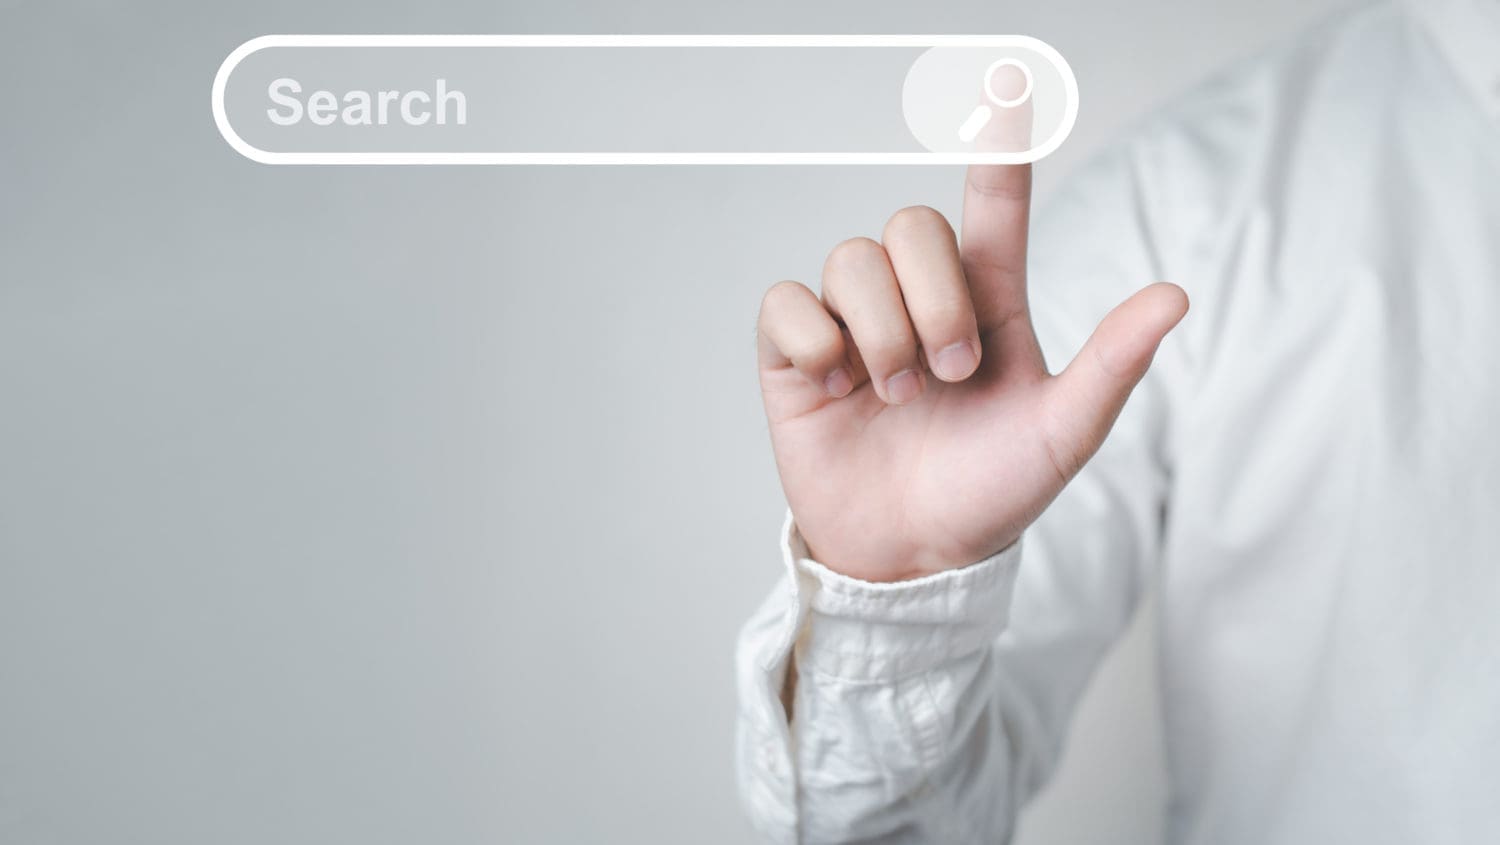 A man is pointing at a search button on a grey background, with an intention to bury negative search results.